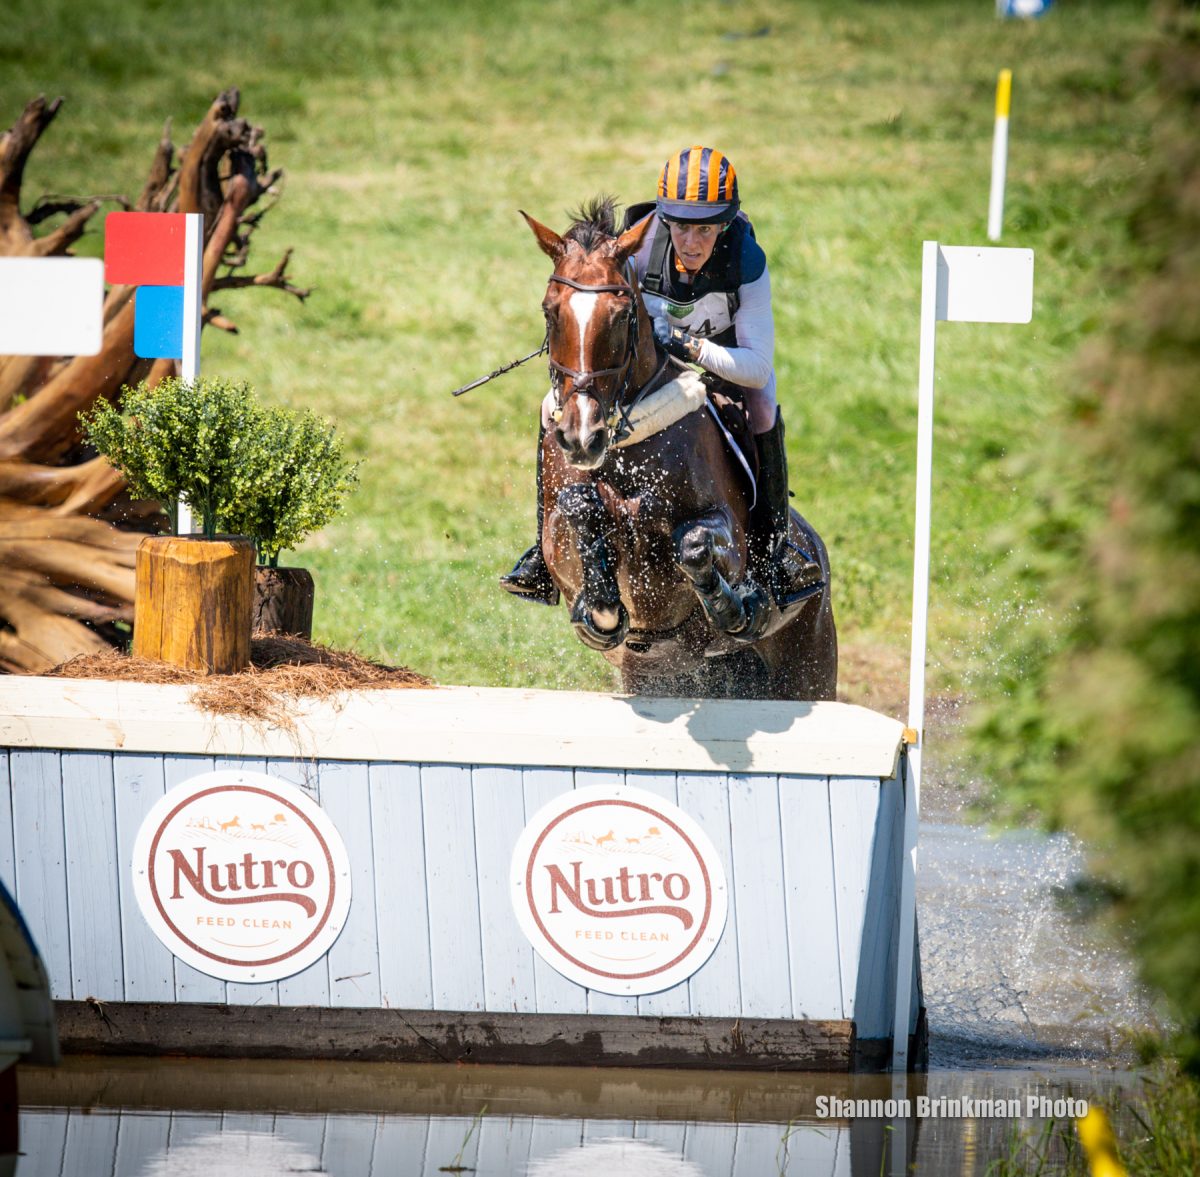 Niro's endurance on XC is due in part to Lane's Mark Farm's AquaTred conditioning. Lane's Mark Farm, located in Ocala, is owned by Renee and Joe Lane. PC: Shannon Brinkman